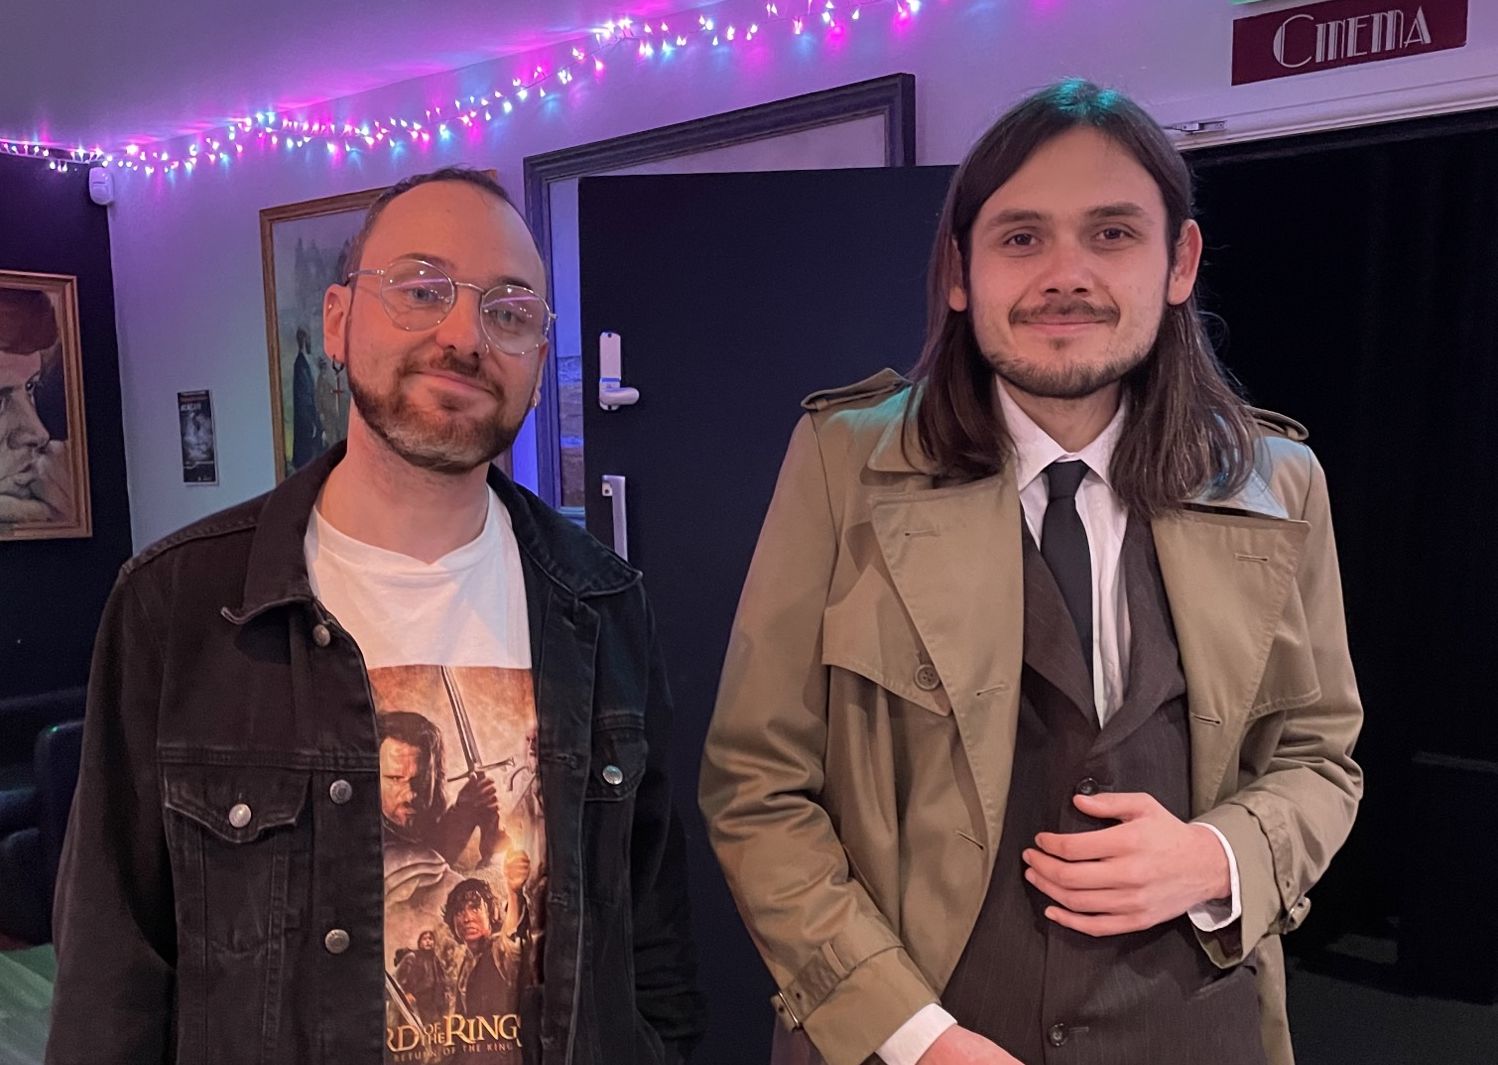 Andy Harrison and Lewis Simpson, who met while studying at the University, have been running Southport Bijou Cinema cinema as a not-for-profit Community Interest Company since it opened in 2019